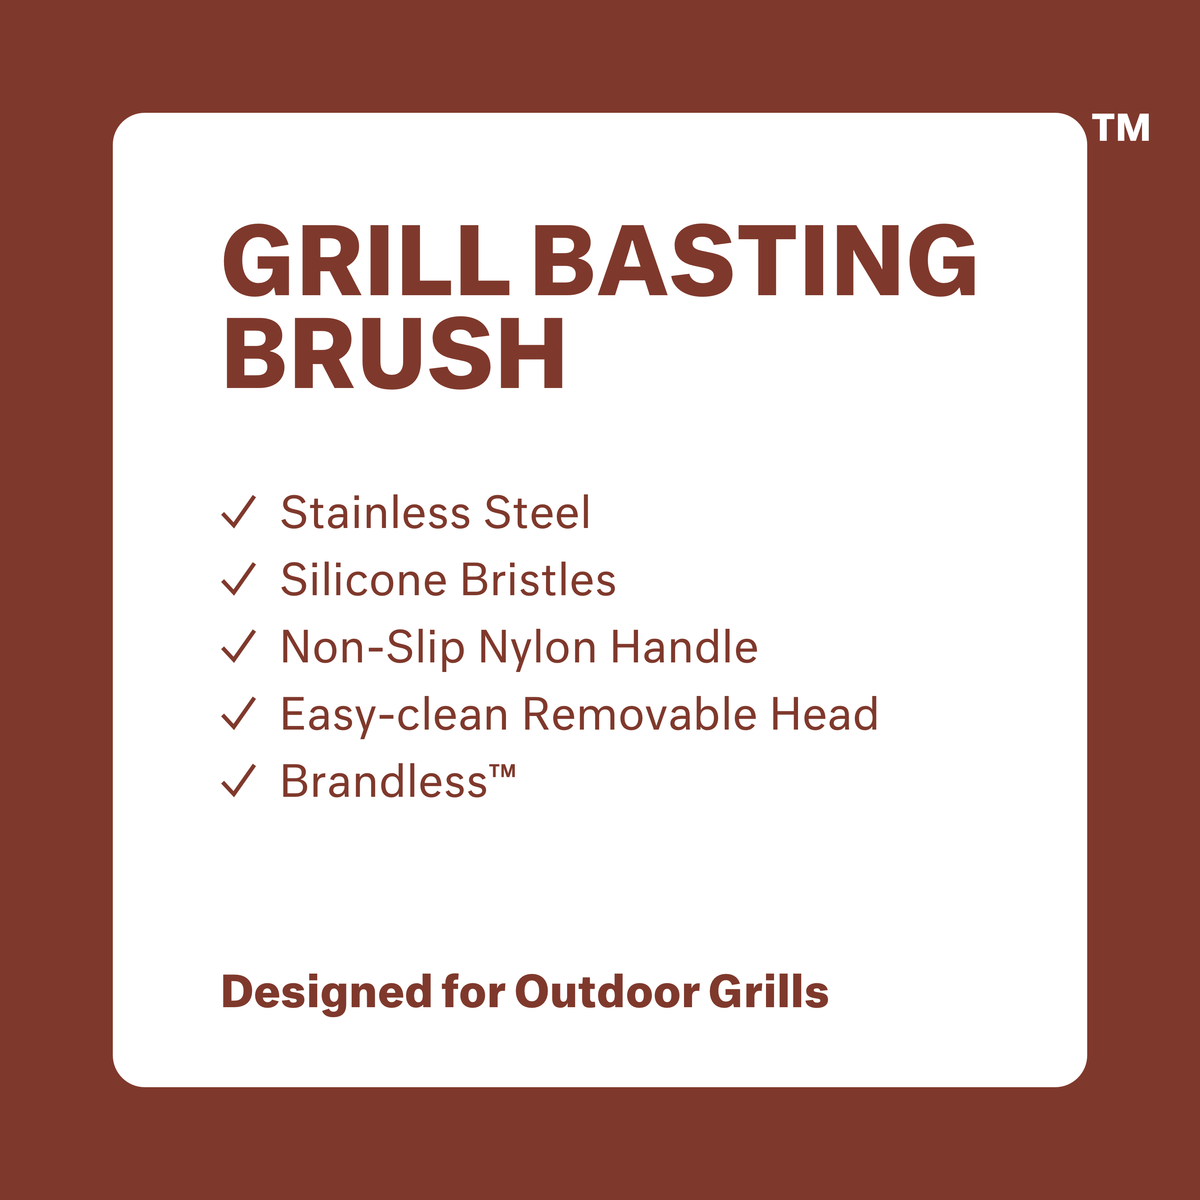 Grill Basting Brush: stainless steel, silicone bristles, non-slip nylon handle, easy-clean removable head, Brandless. Designed for outdoor grills.